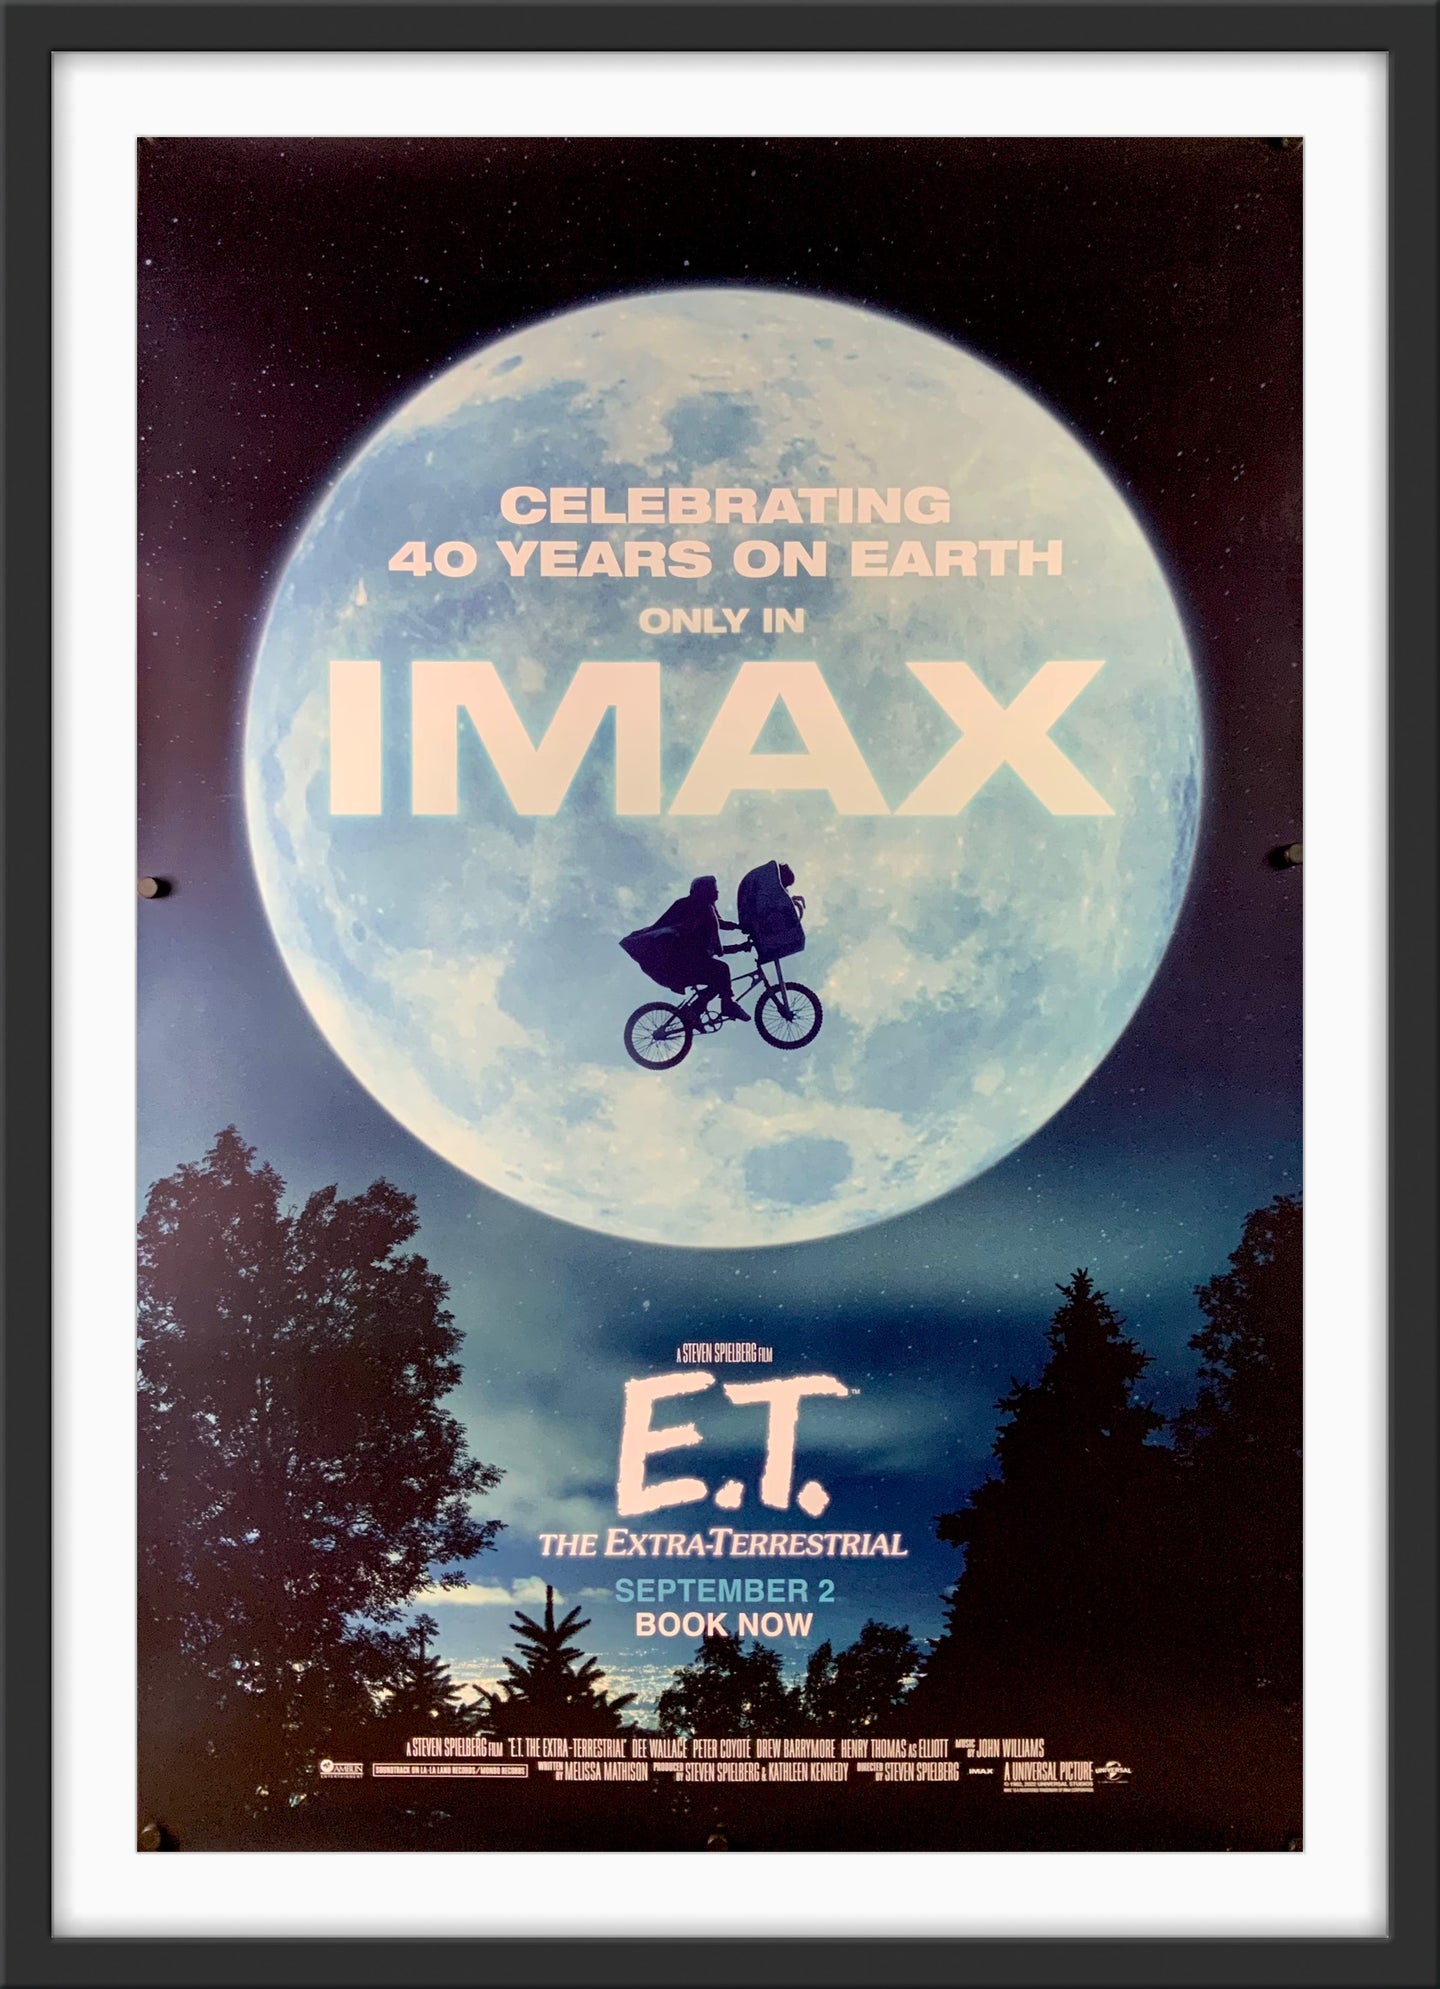 An original movie poster for the Steven Spielberg film E.T. The Extra Terrestrial